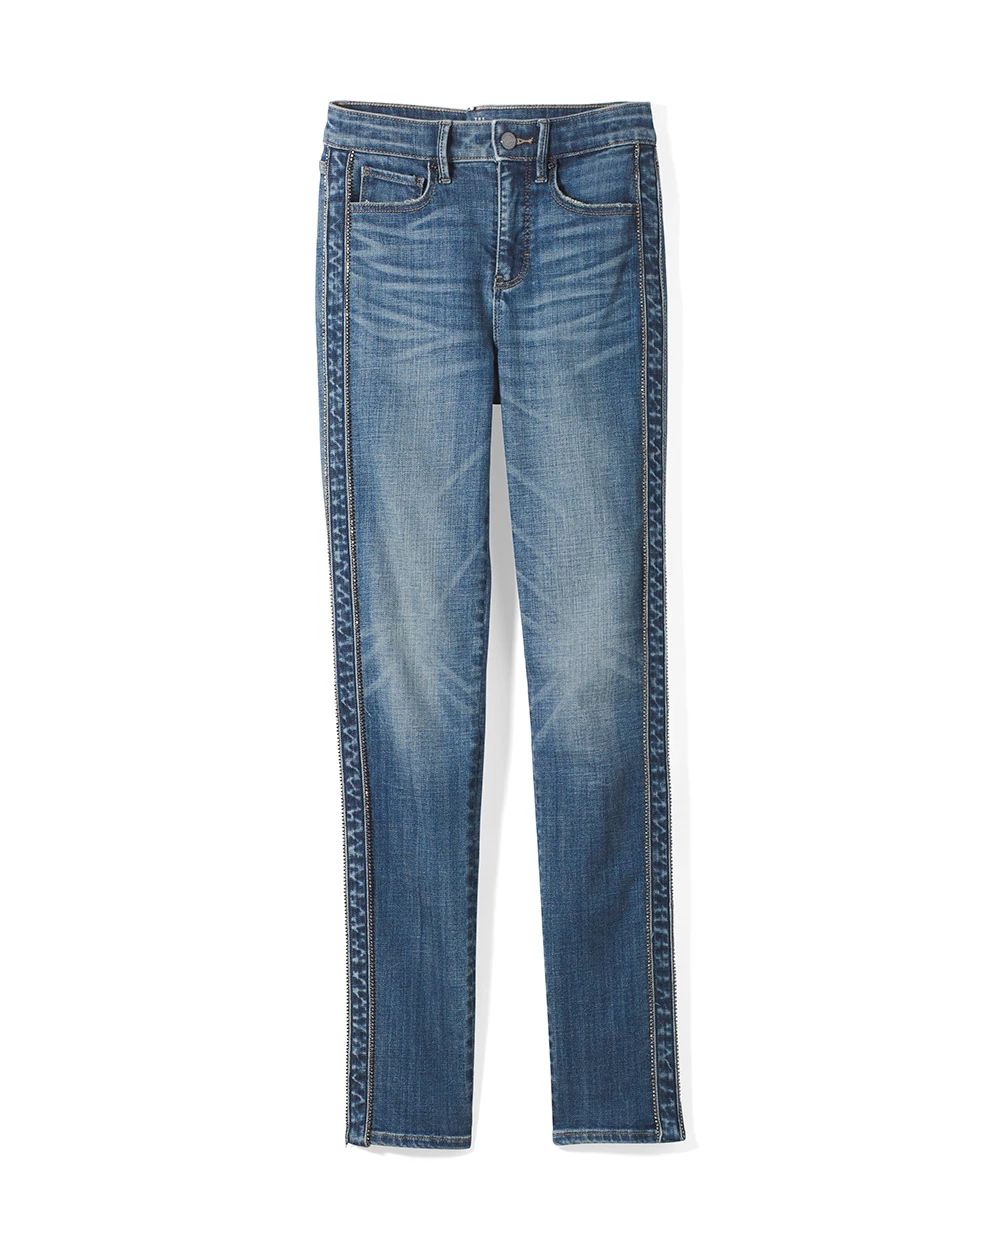 Petite High-Rise Everyday Soft Denim  Novelty Side Stripe Slim Ankle Jeans click to view larger image.